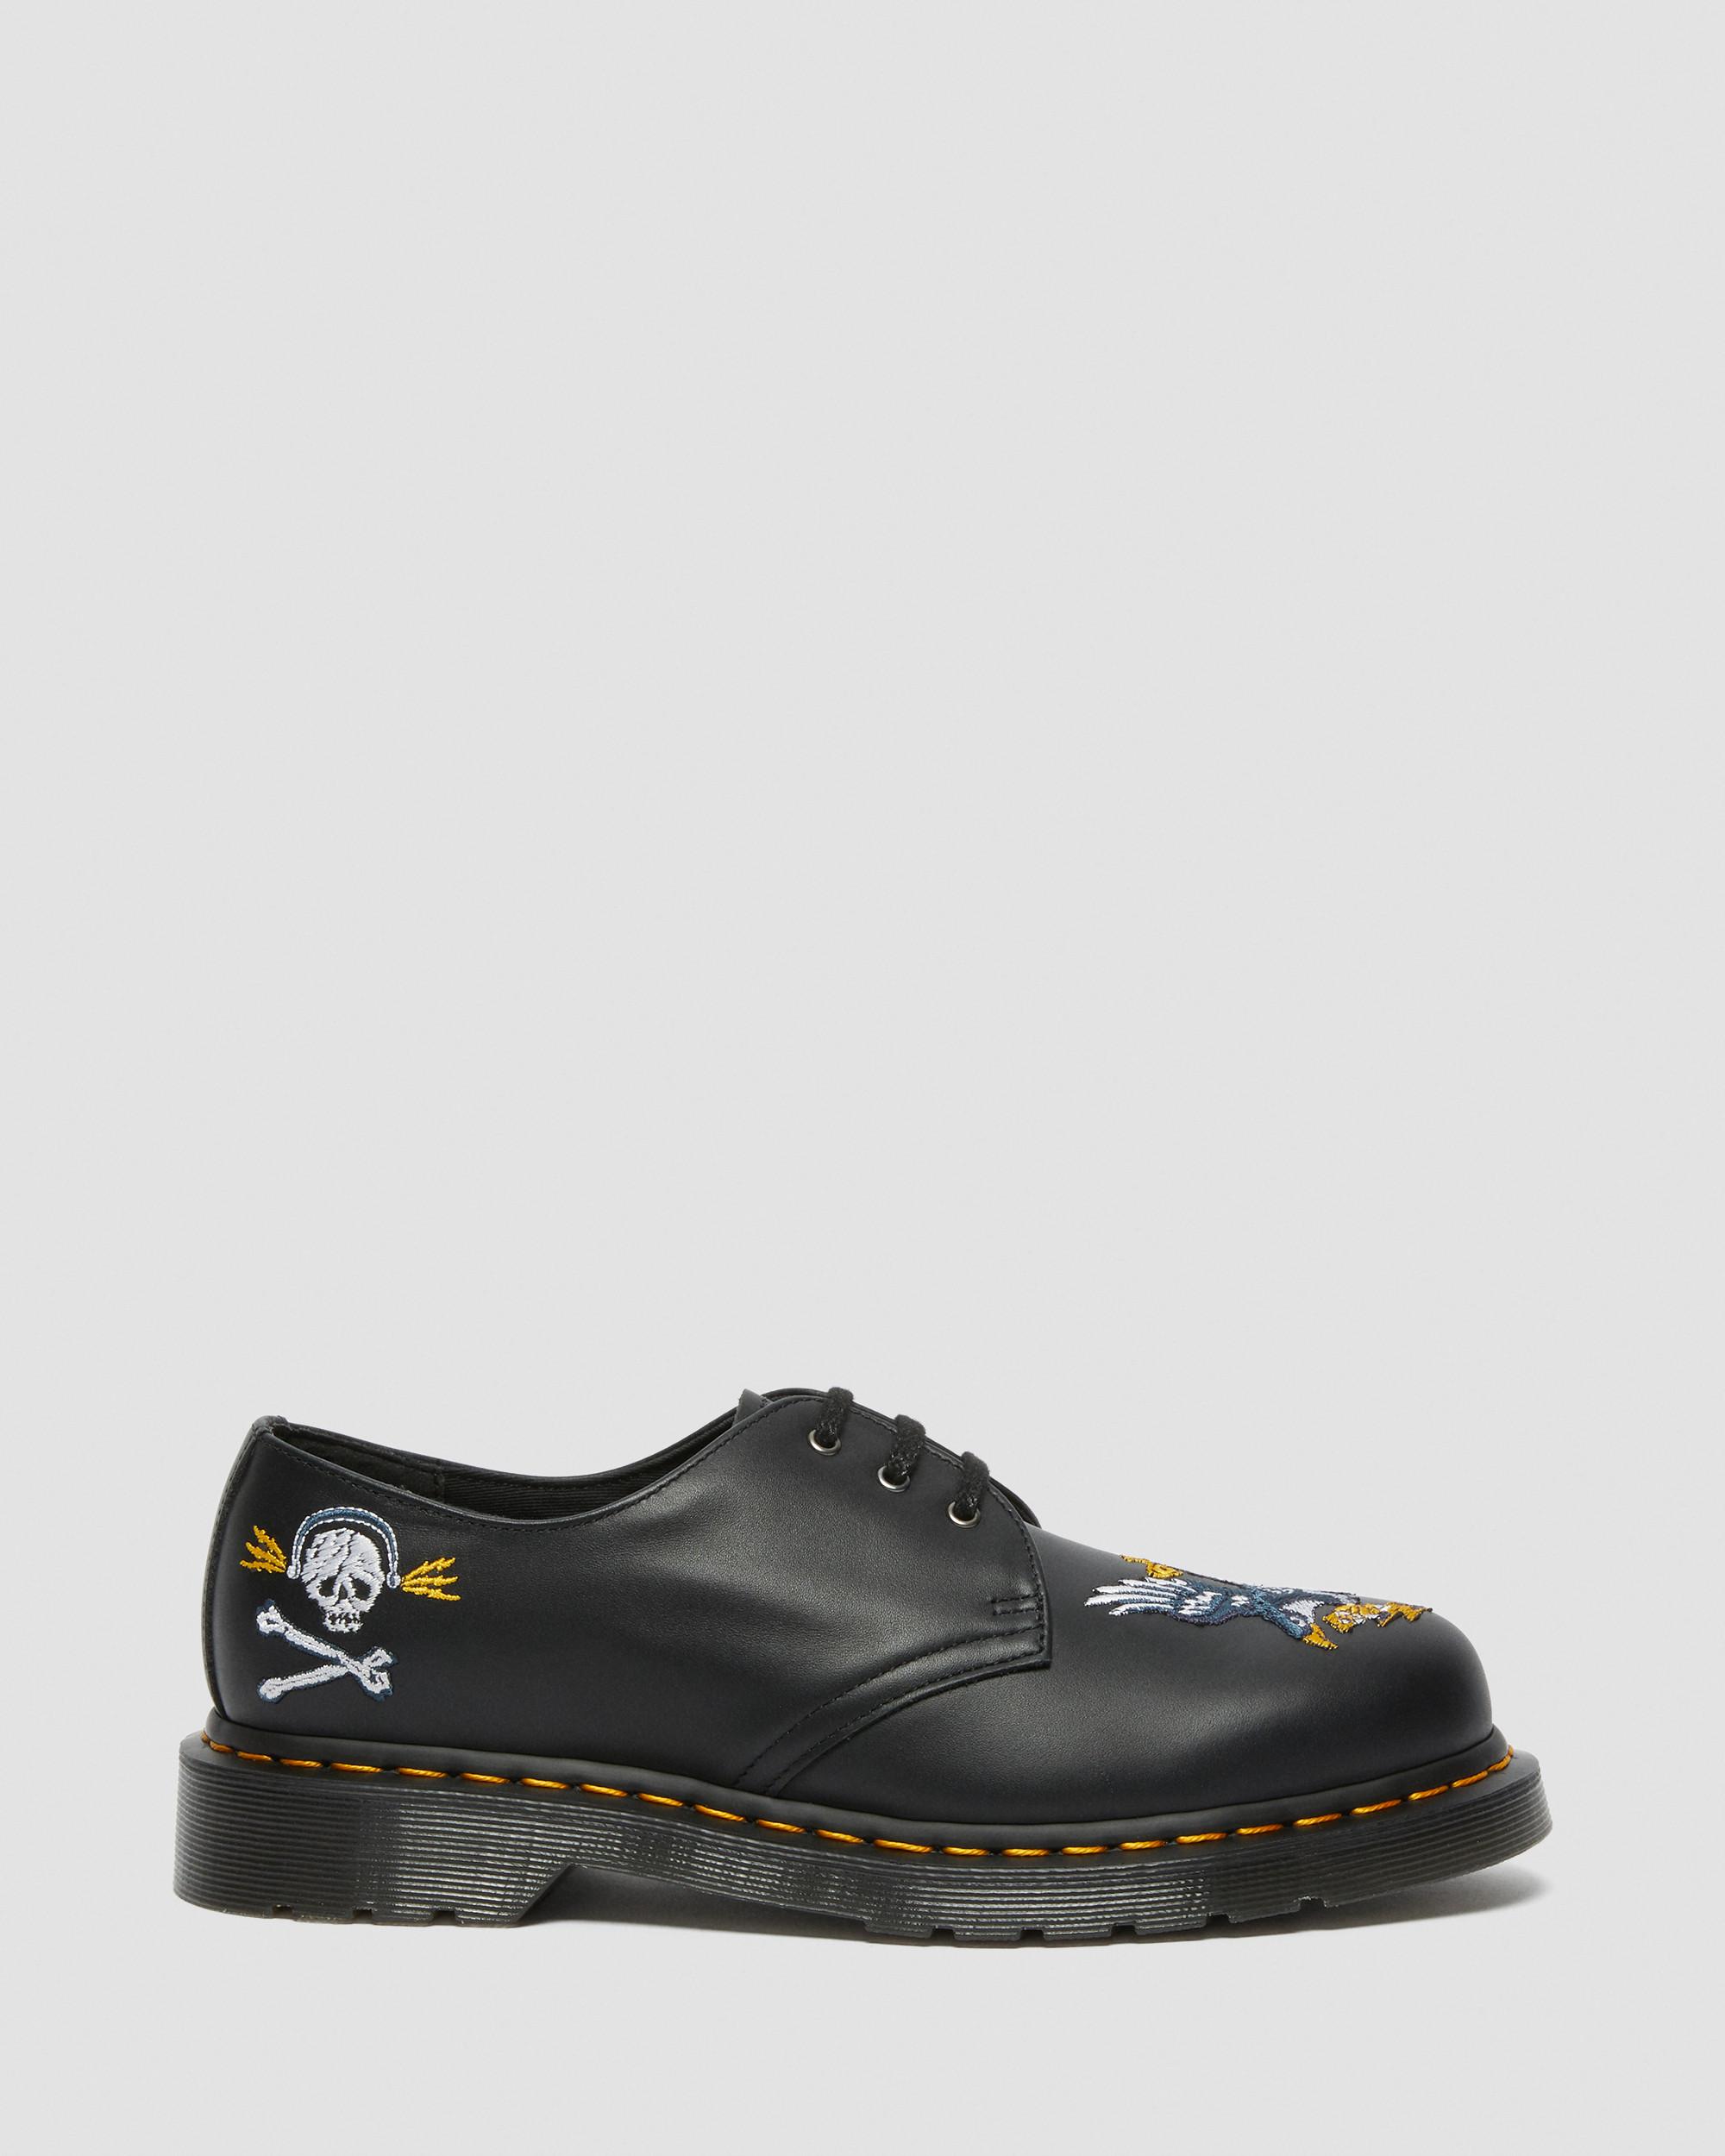 1461 Souvenir Embroidered Leather Shoes in Black | Dr. Martens